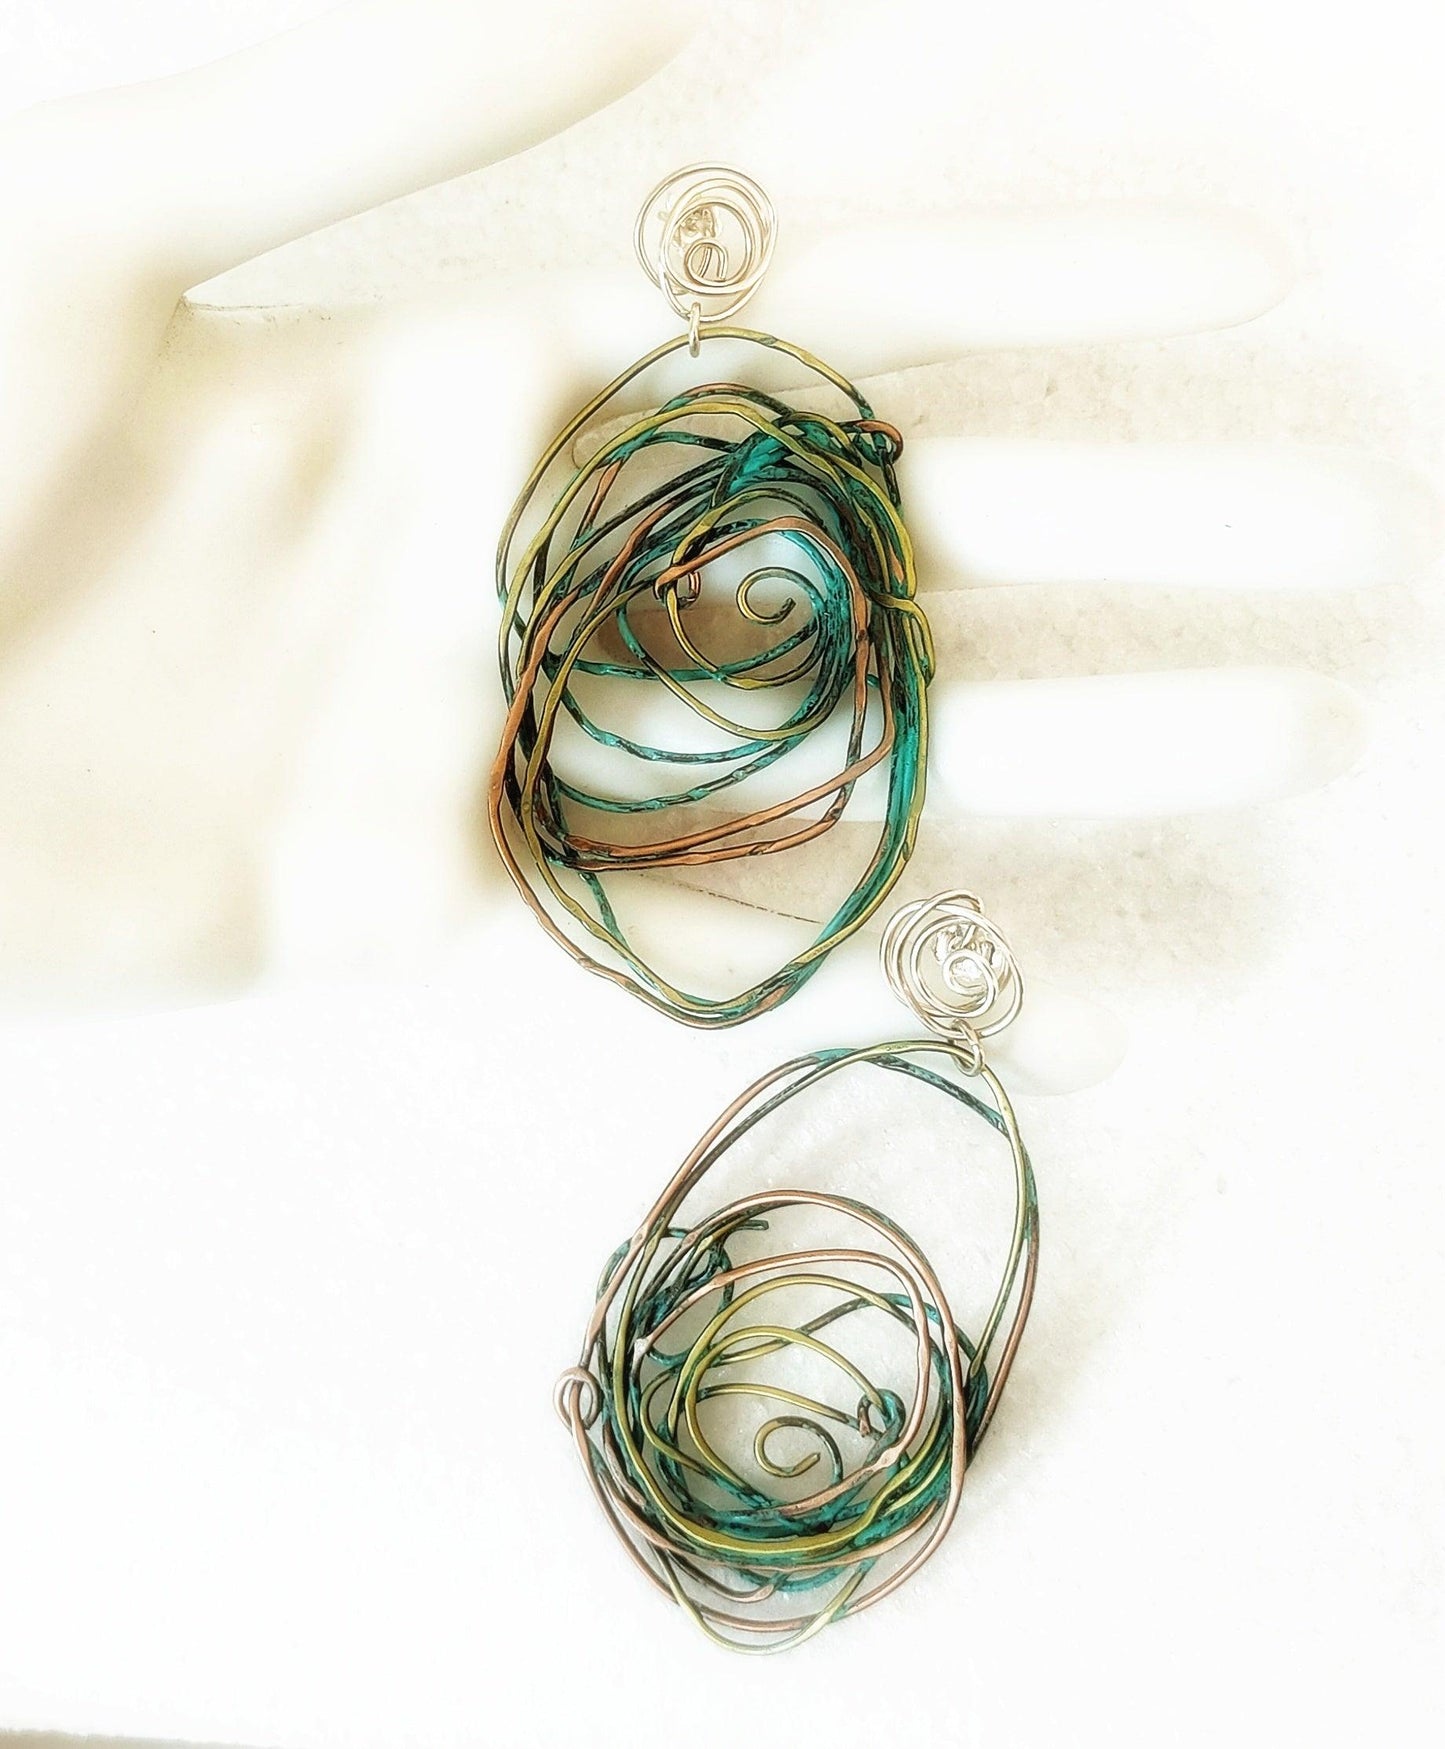 Bronze, copper and silver earrings with green patina